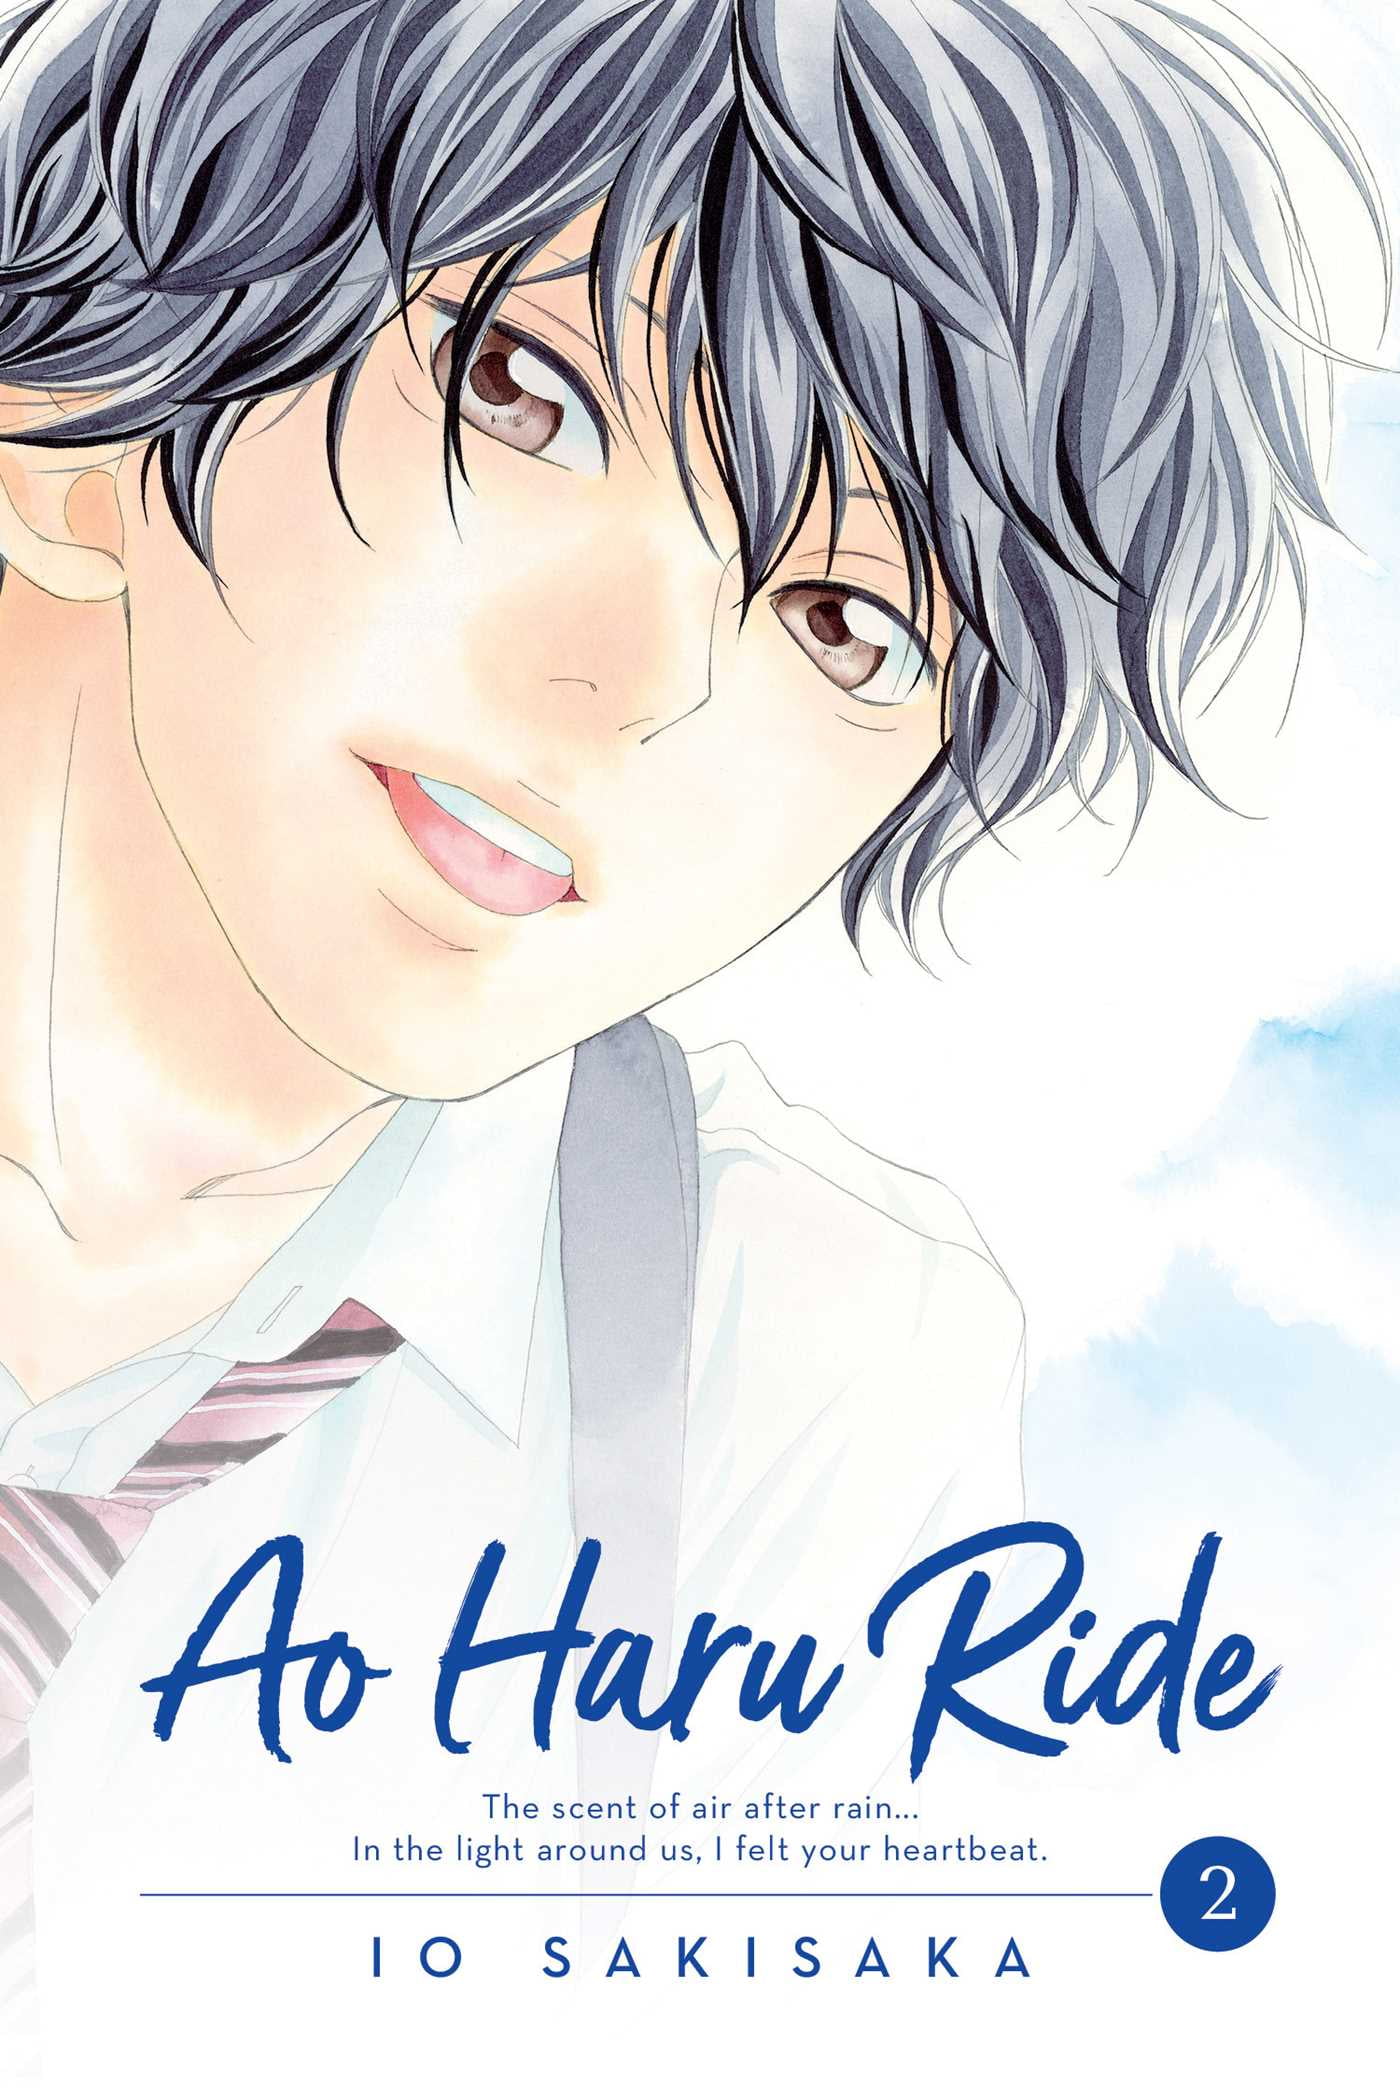 Ao Haru Ride Blue Spring Ride With Cat | Poster